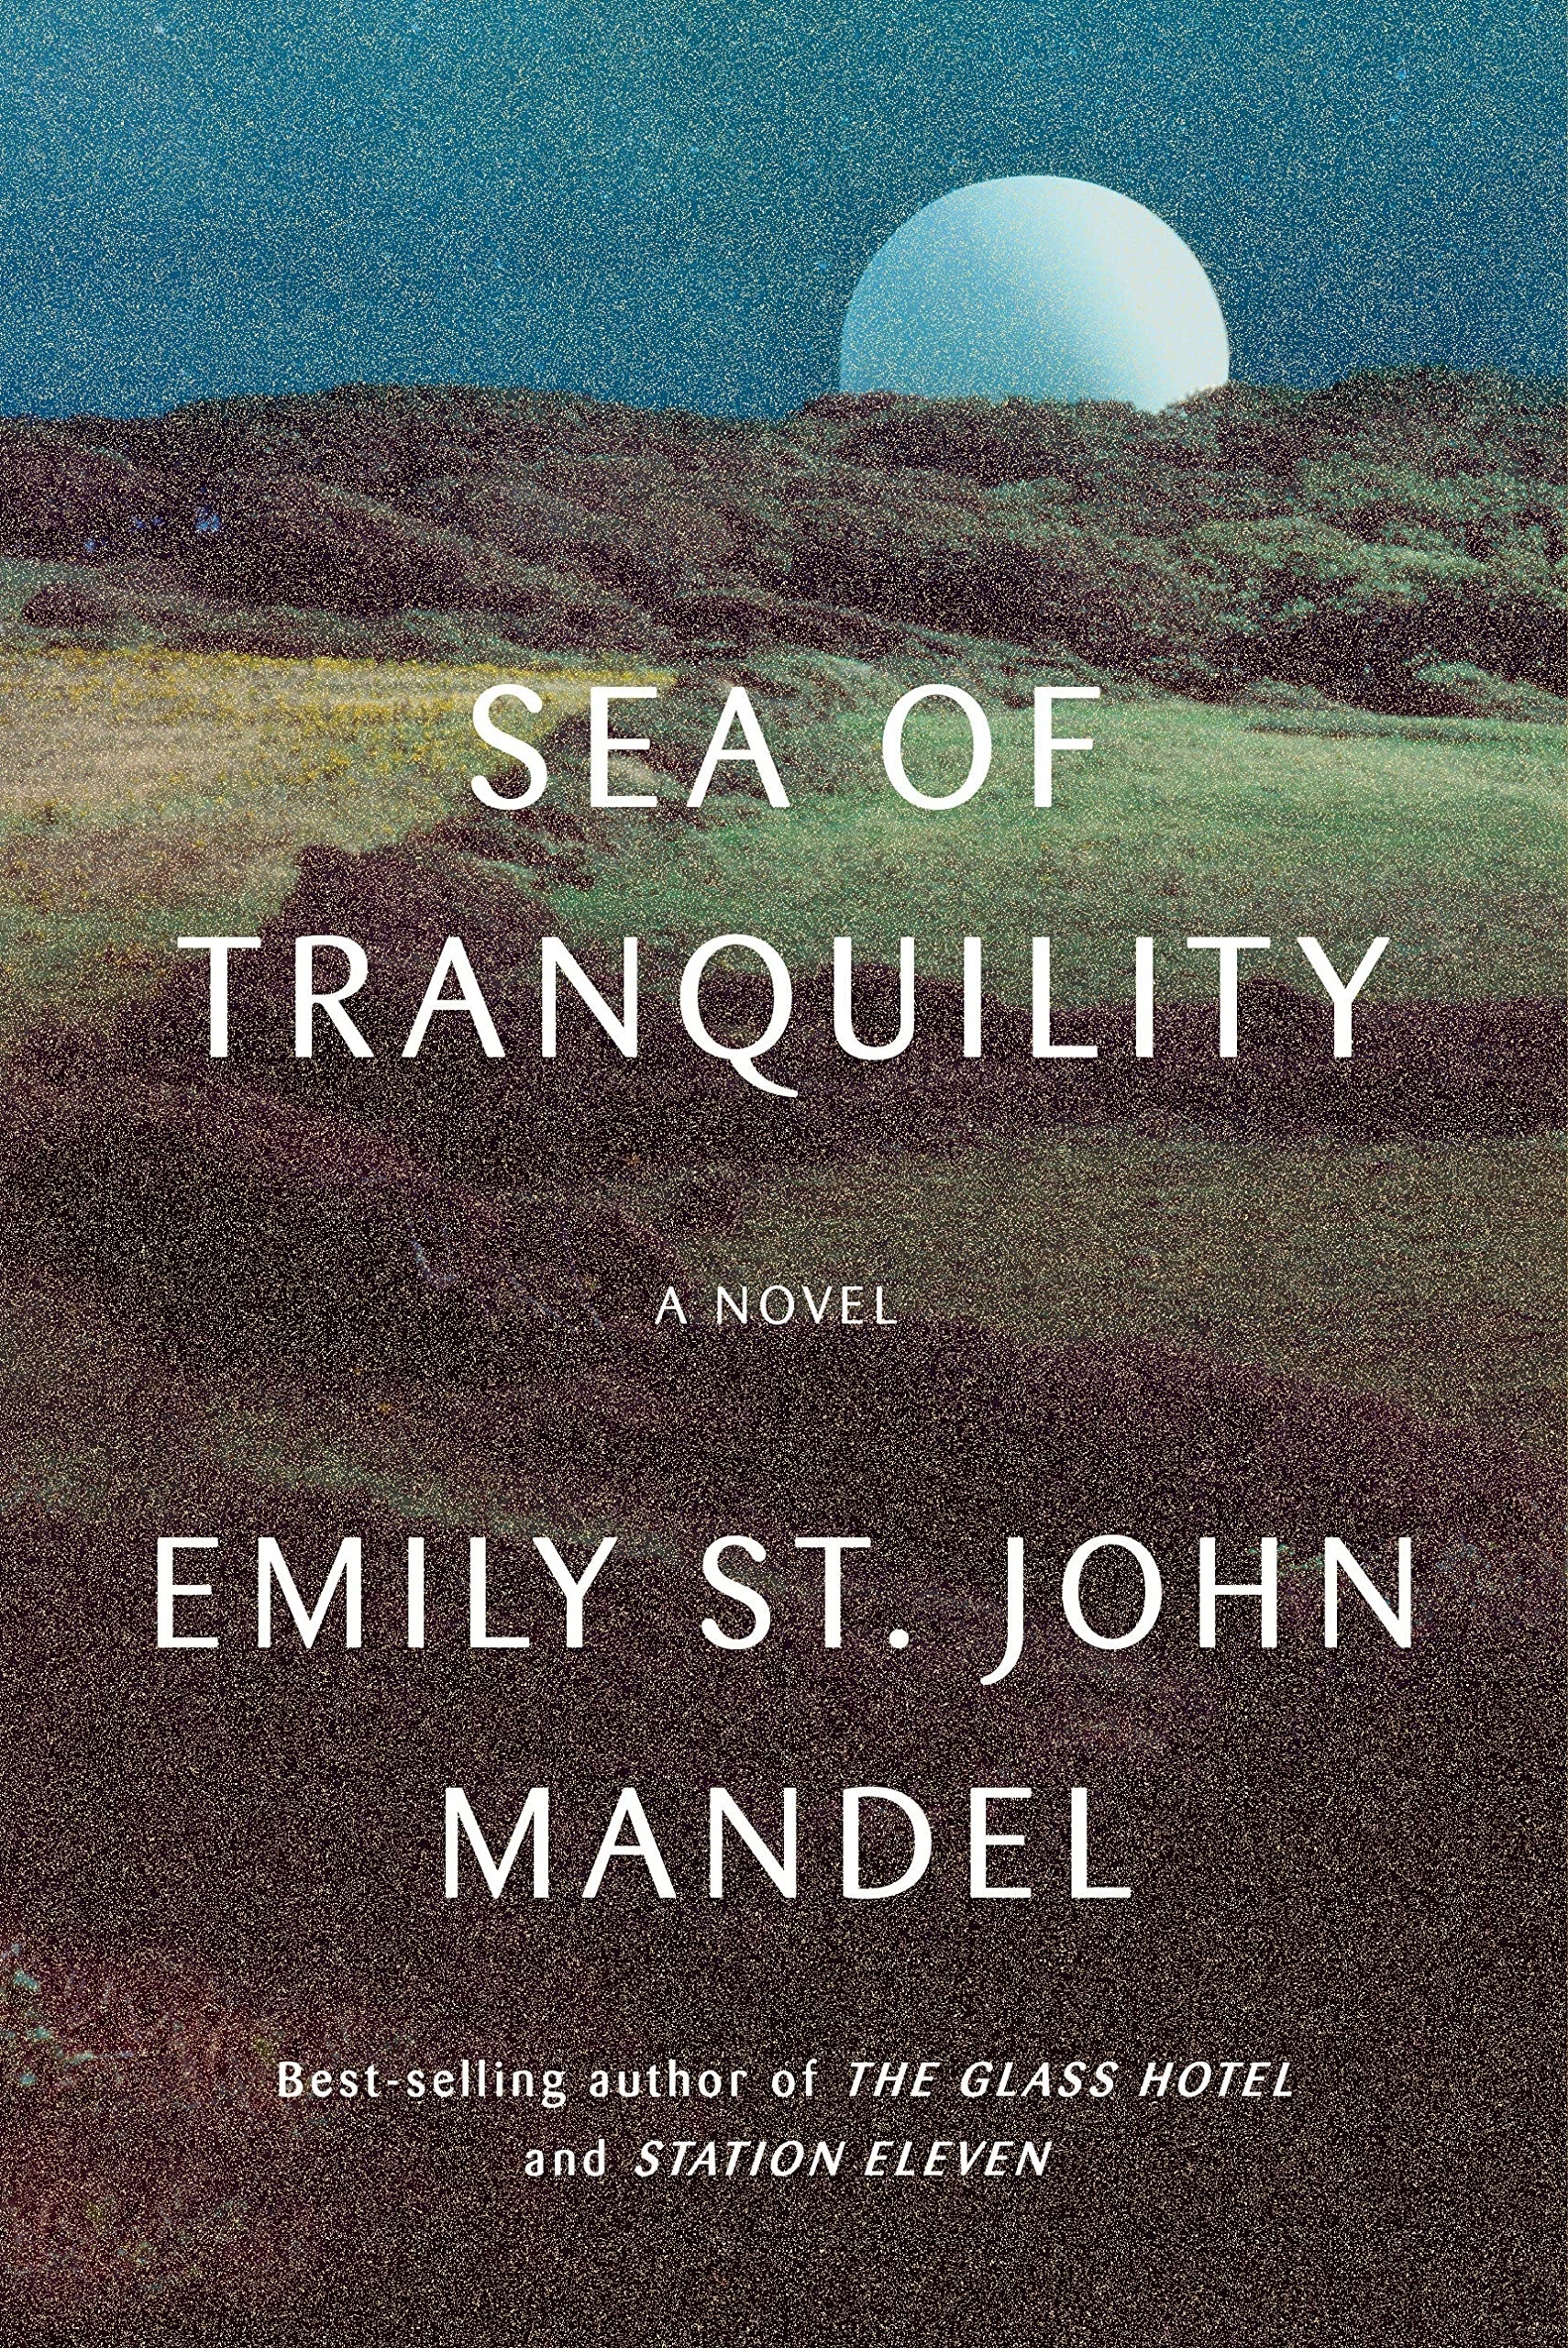 The cover of &quot;Sea of Tranquility&quot; by Emily St. John Mandel